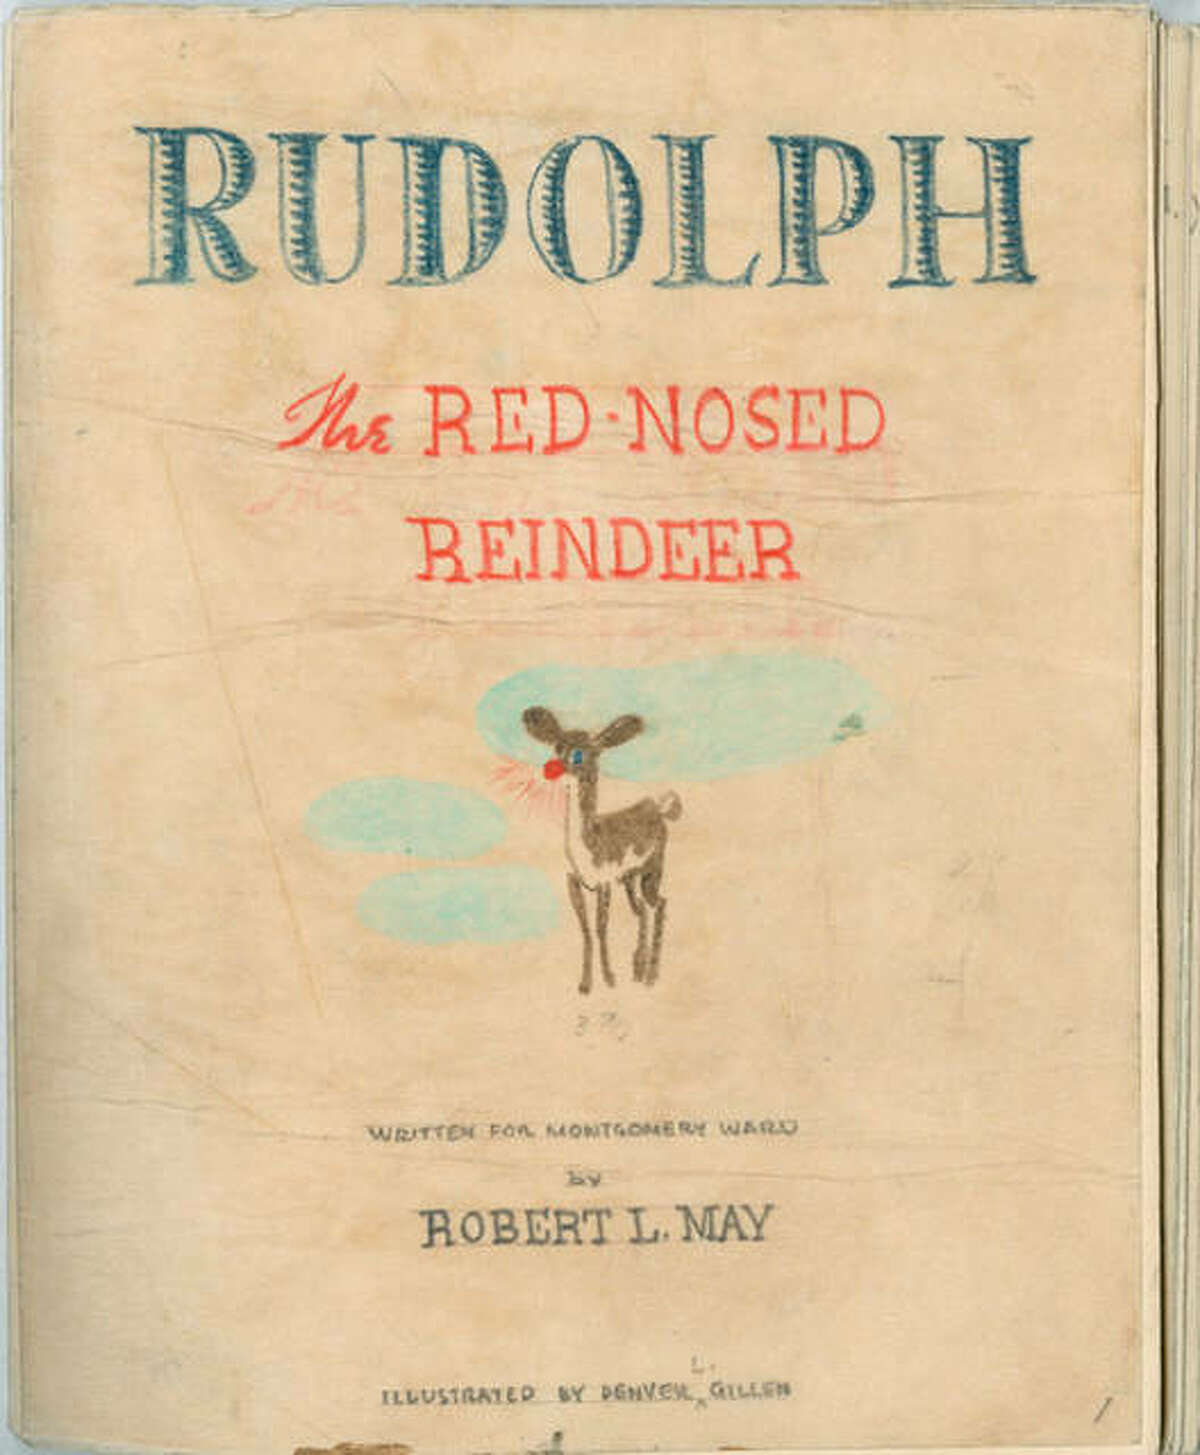 Additional images from the original manuscript for Rudolph the Red Nosed Reindeer and the finished book in 1939.